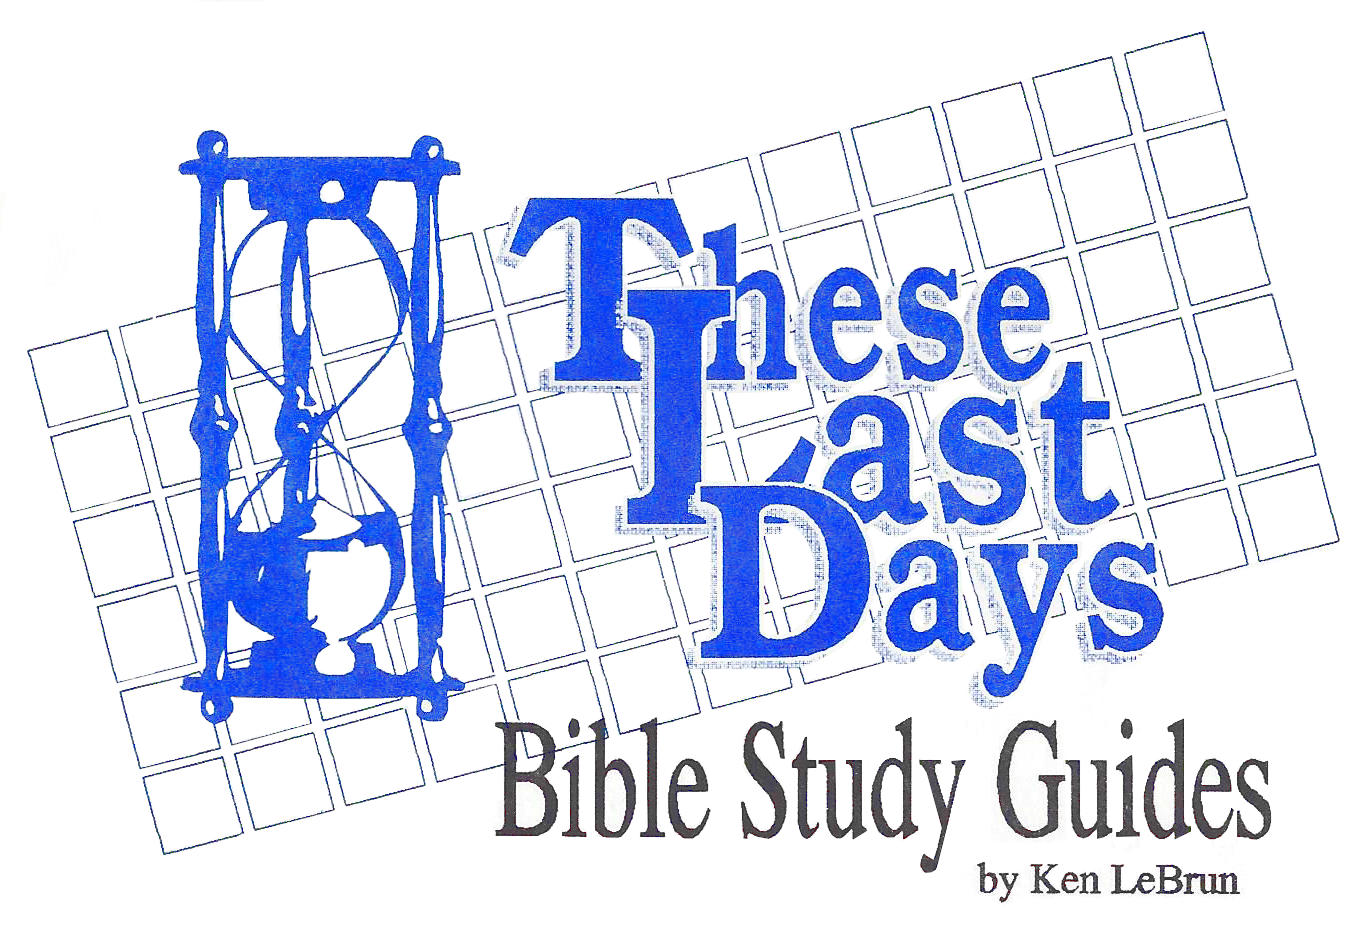 These Last Days Bible Study Guides by Pastor Ken LeBrun